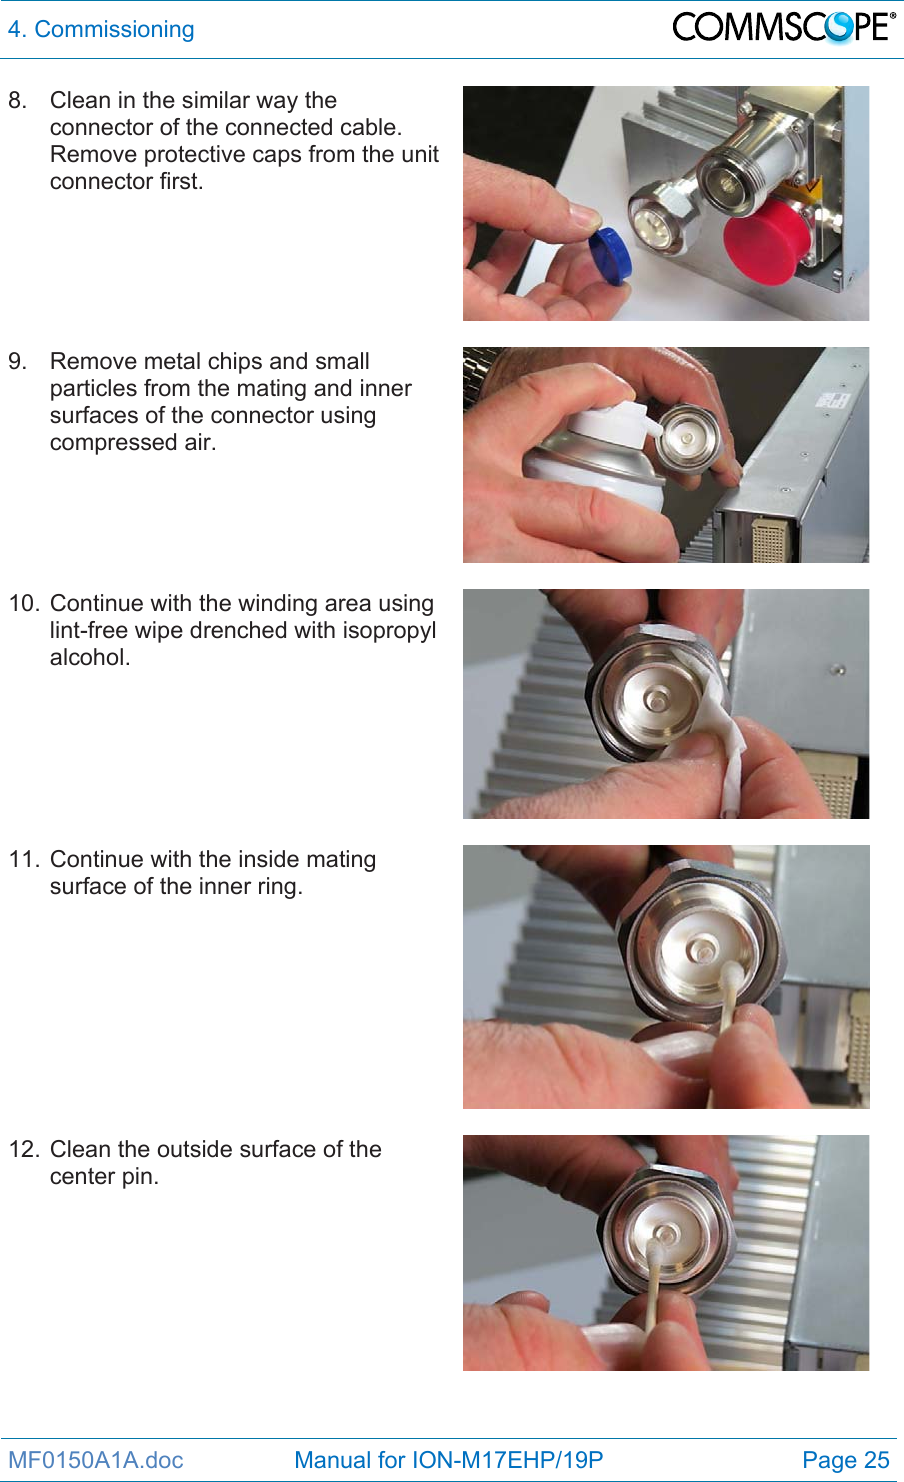 4. Commissioning  MF0150A1A.doc                 Manual for ION-M17EHP/19P  Page 25 8.  Clean in the similar way the connector of the connected cable. Remove protective caps from the unit connector first.  9.  Remove metal chips and small particles from the mating and inner surfaces of the connector using compressed air.   10. Continue with the winding area using lint-free wipe drenched with isopropyl alcohol.   11. Continue with the inside mating surface of the inner ring.   12. Clean the outside surface of the center pin. 